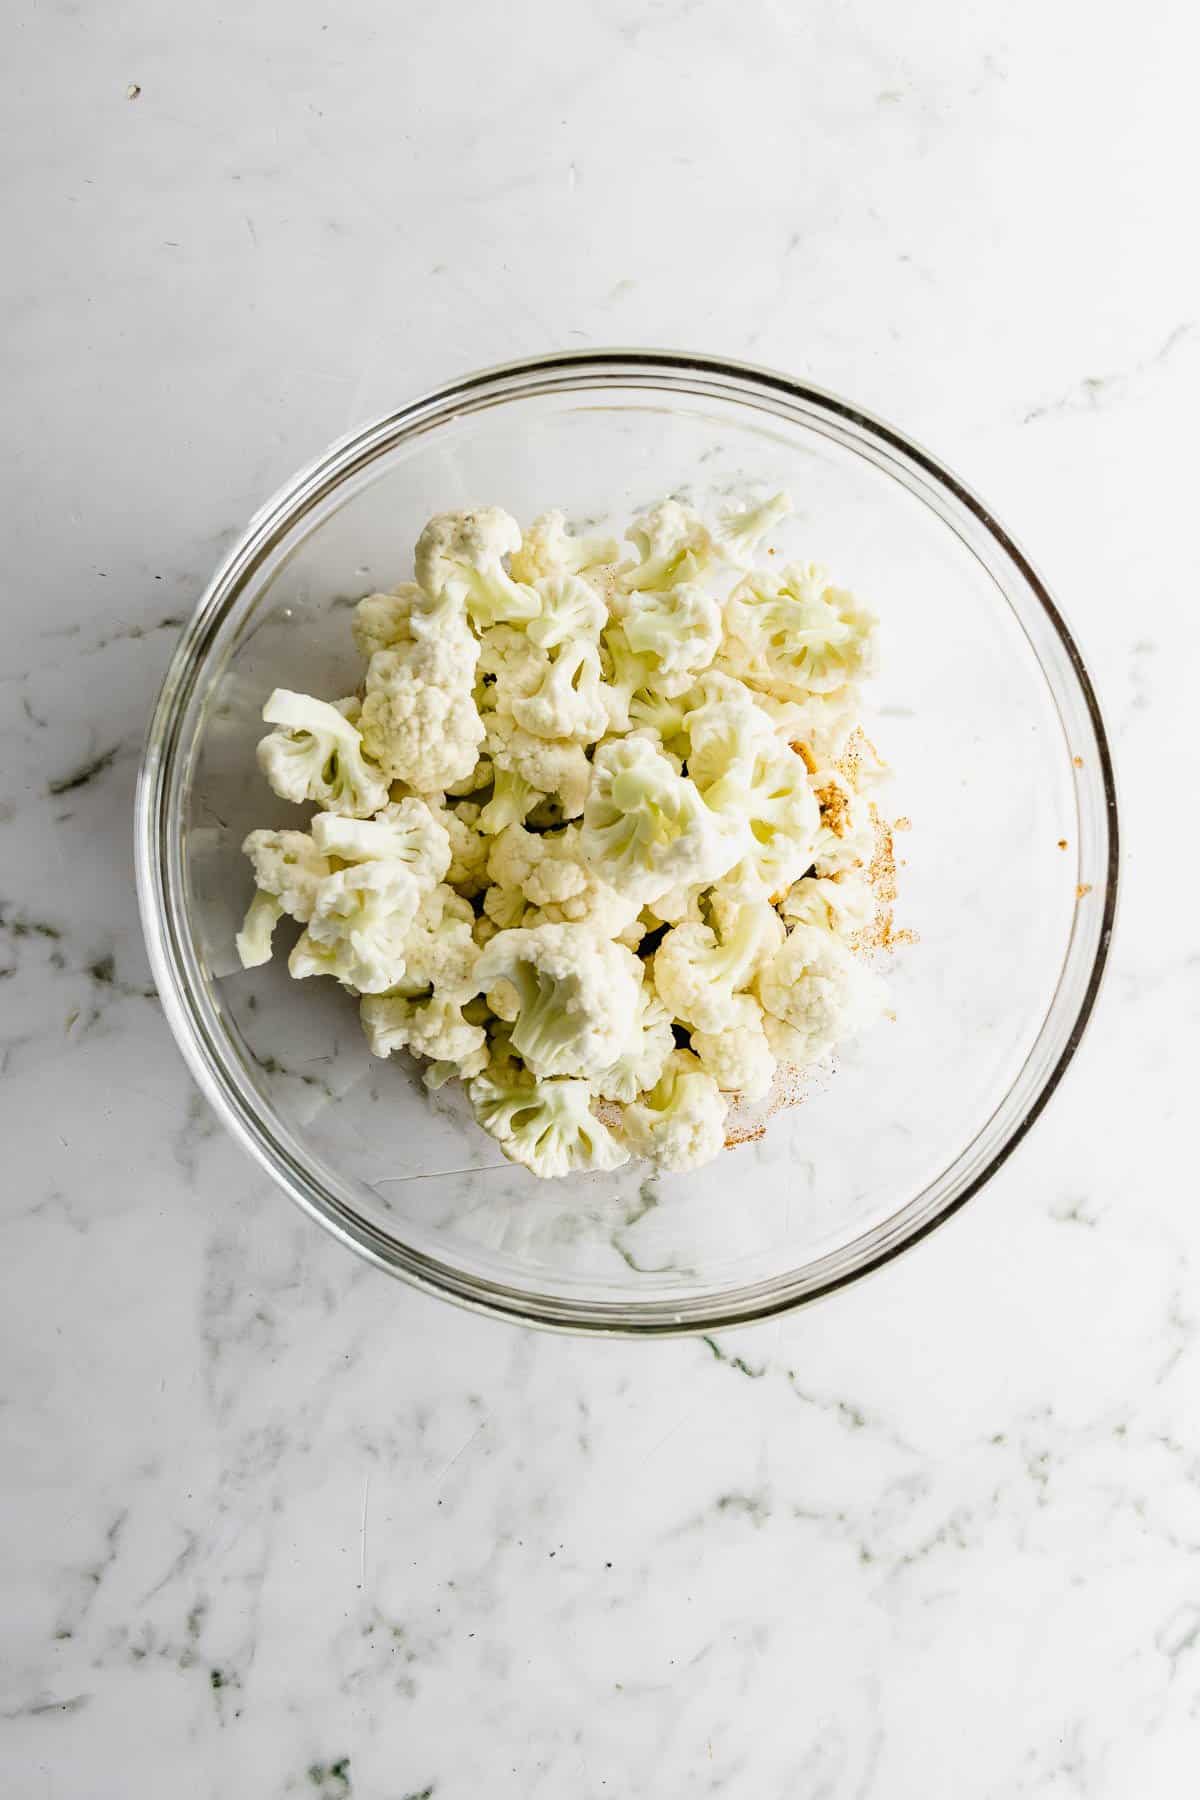 Cauliflower florets in a bowl on a marble countertop.